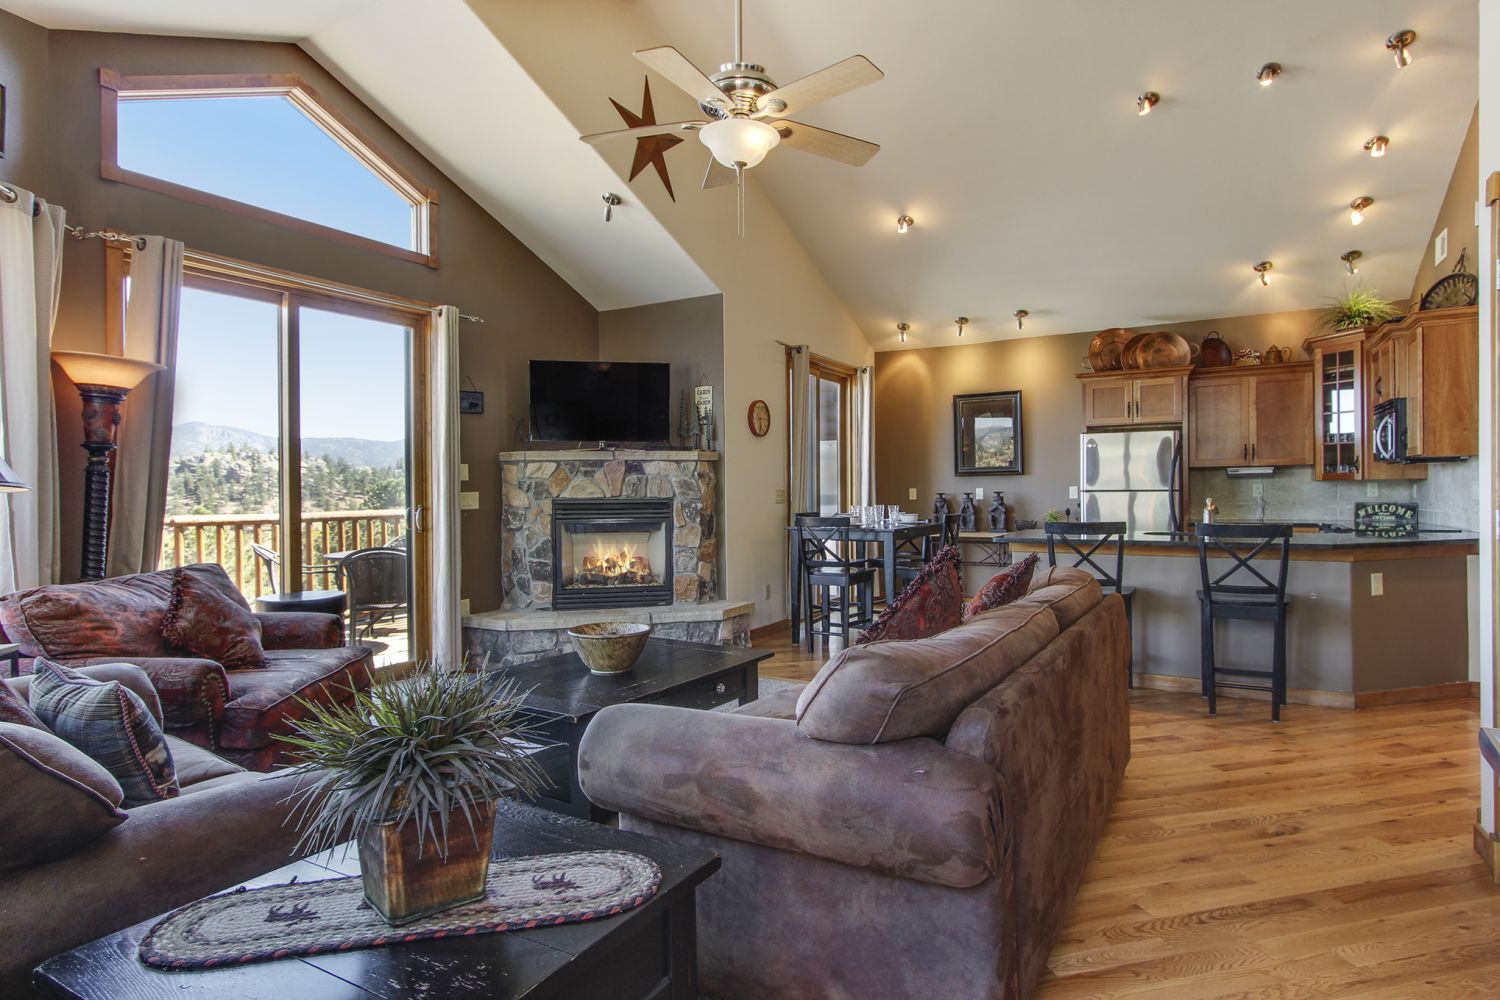 The Twin Owls 21A - Enter into this beautiful open space. Living room with comfy seating area, fireplace, flat screen TV and open full kitchen with breakfast bar. 